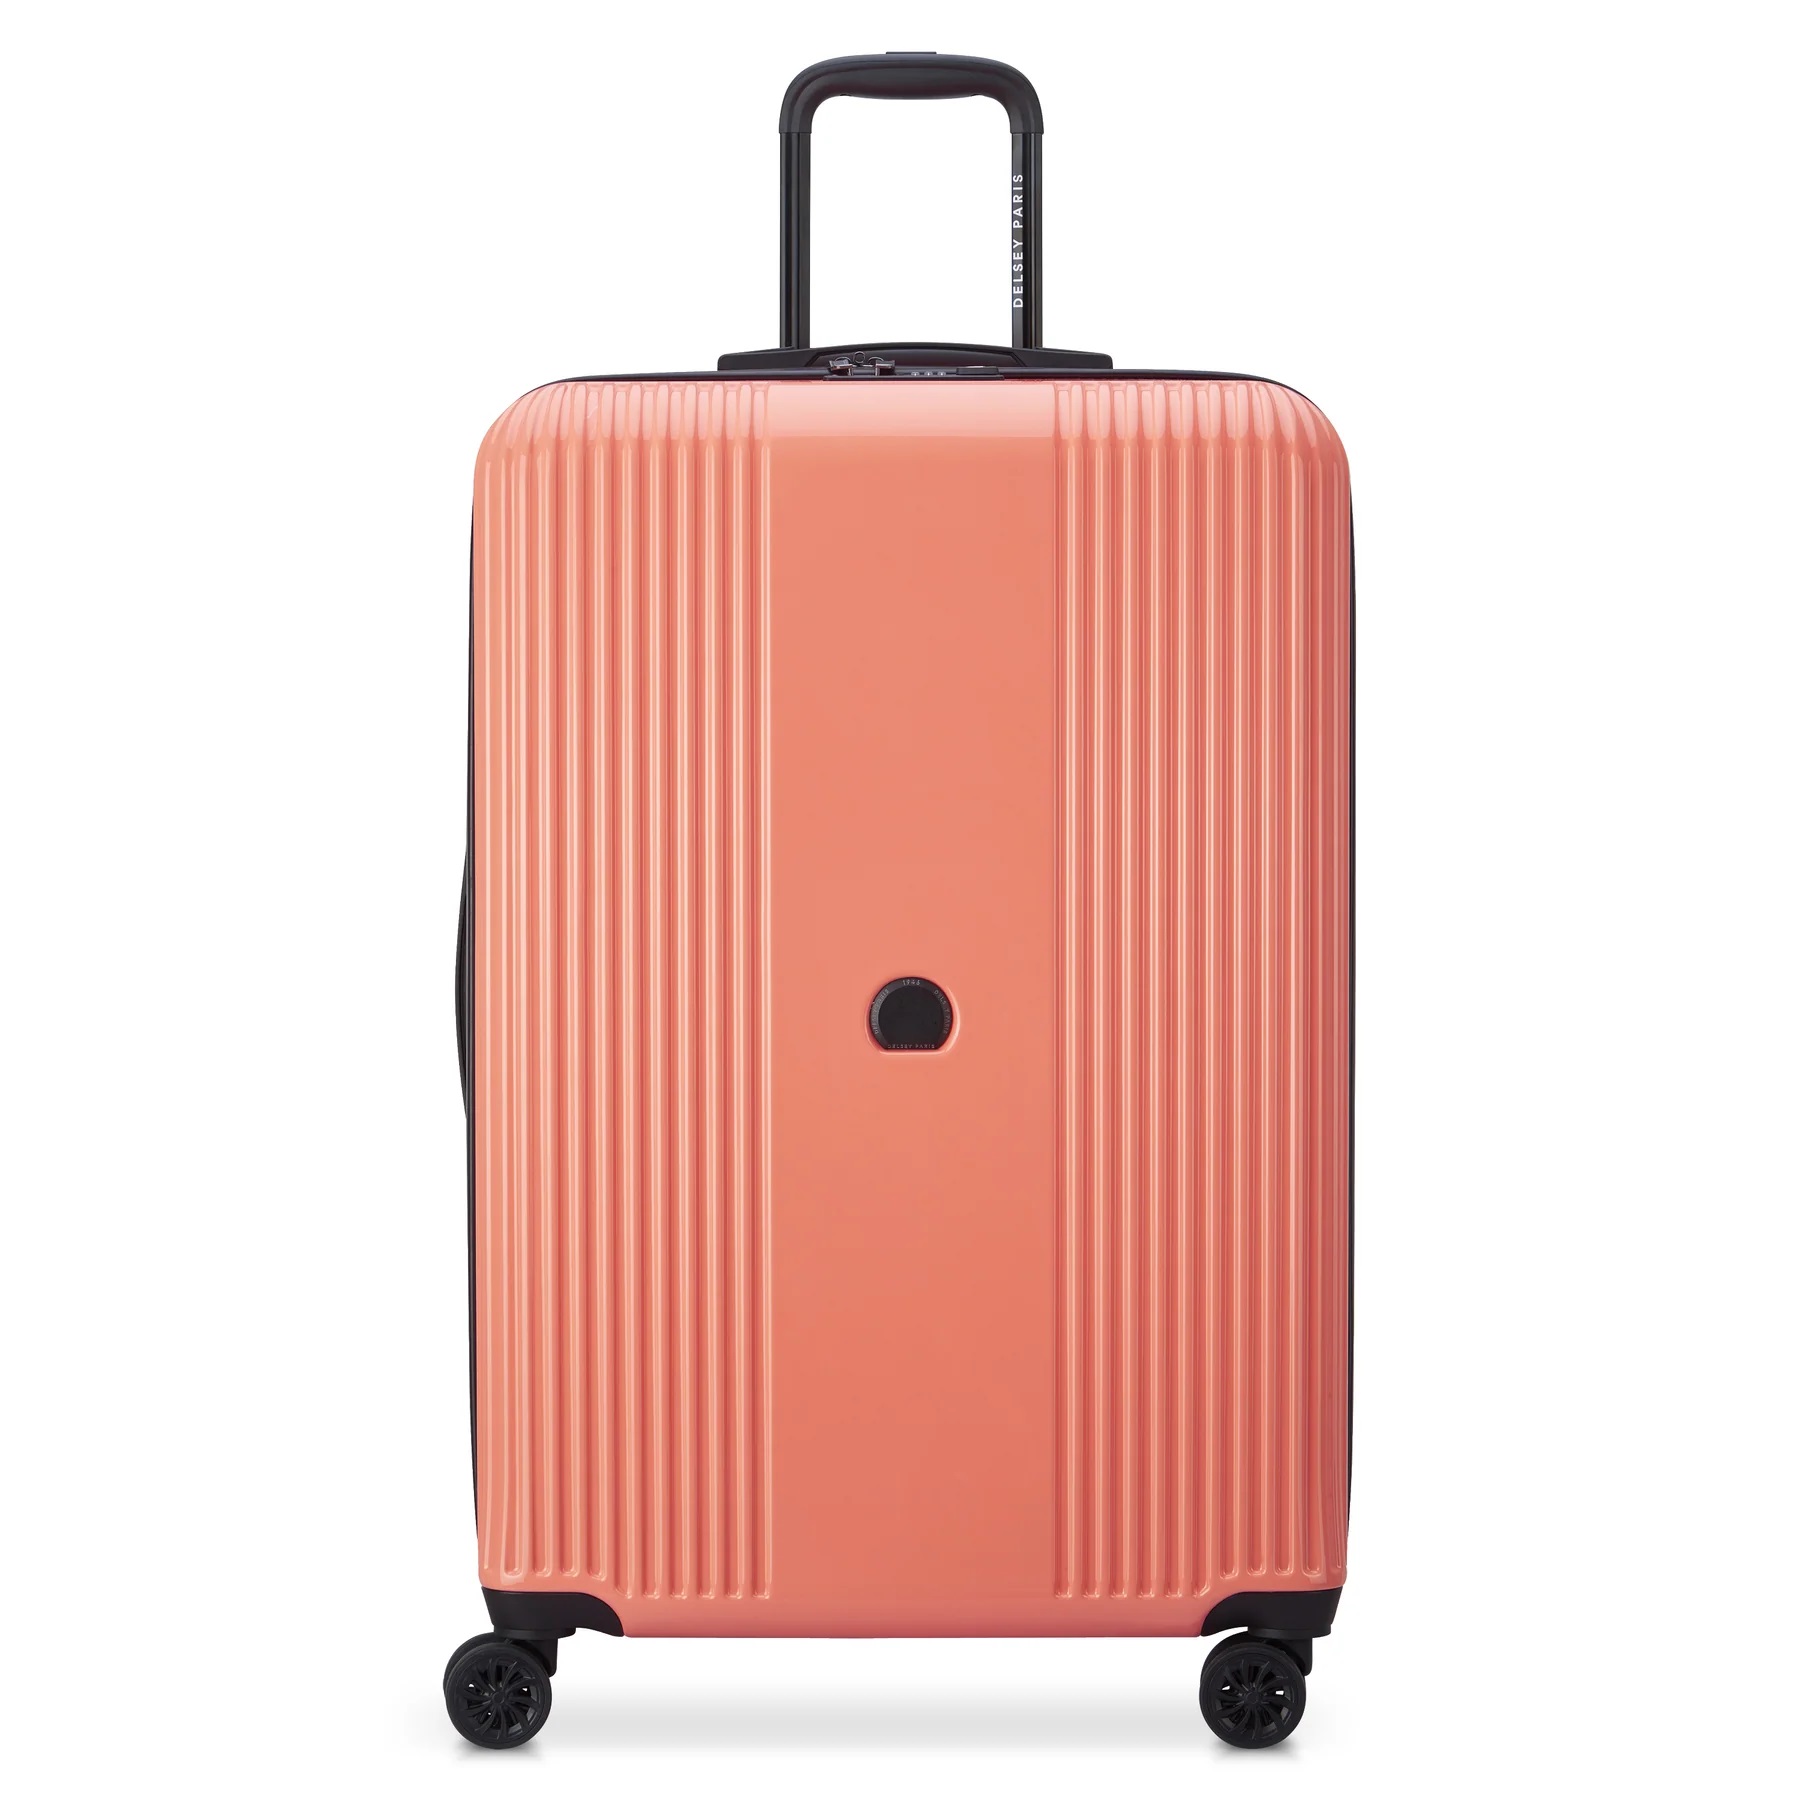 VALI DELSEY PARIS LARGE TRUNK OPHELIE 4 DOUBLE WHEEL EXPANDABLE TROLLEY CORAL PINK SUITCASE 8